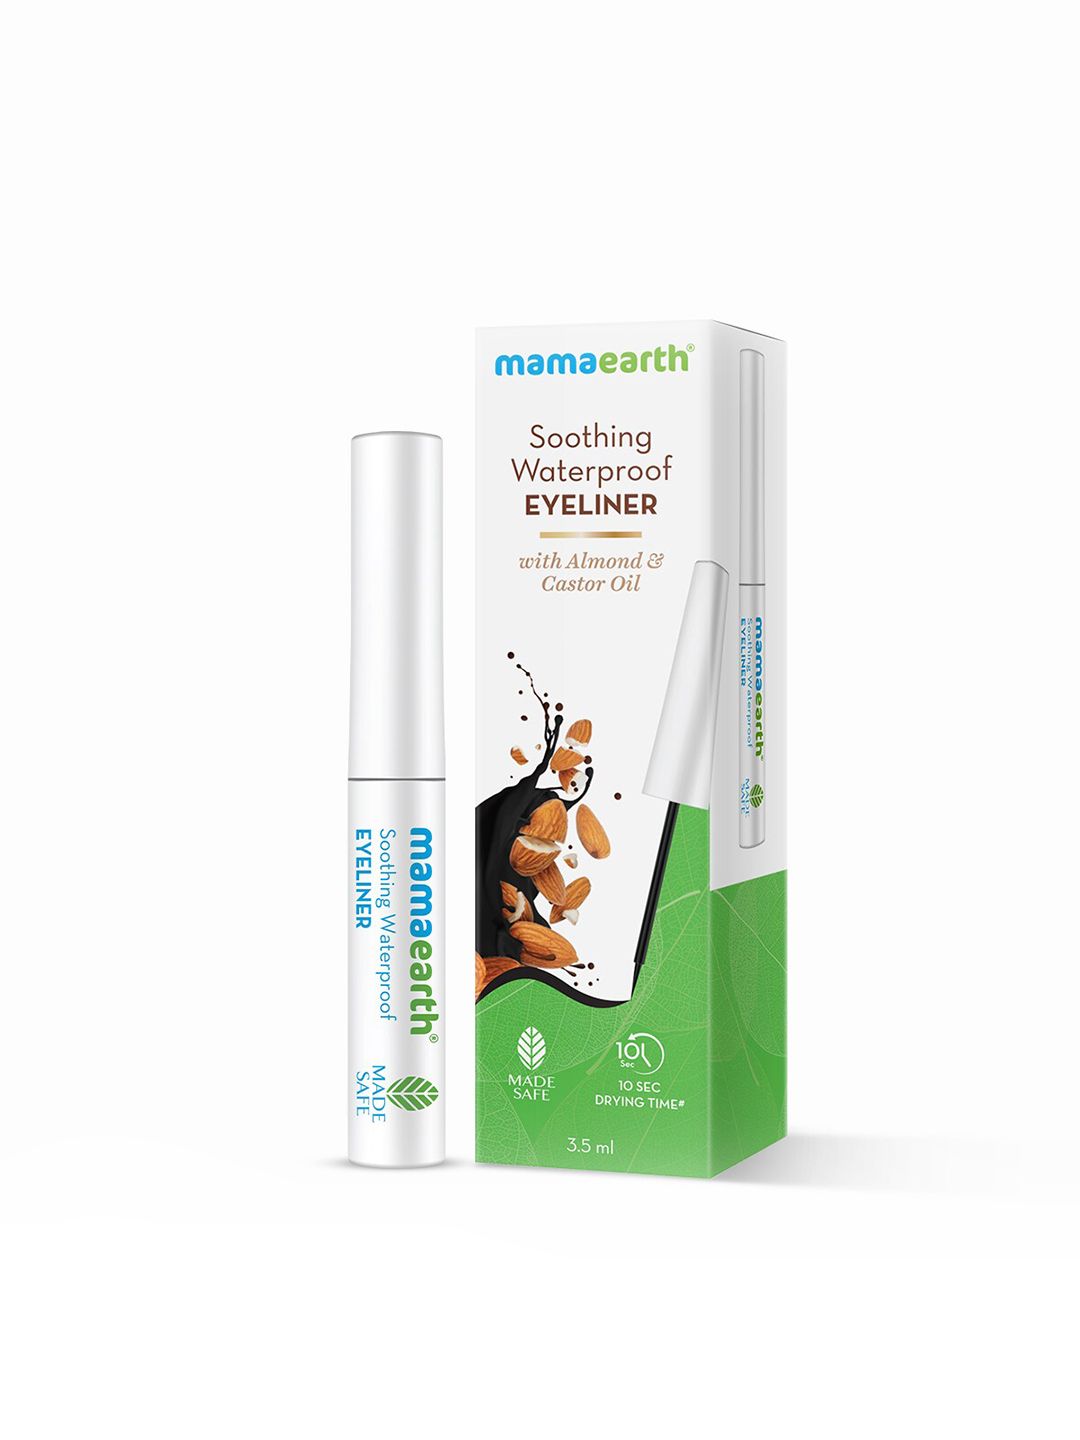 Mamaearth Soothing Waterproof Eyeliner With Almond Oil & Castor Oil for 10 Hour Long Stay - 3.5 ml - Black Price in India